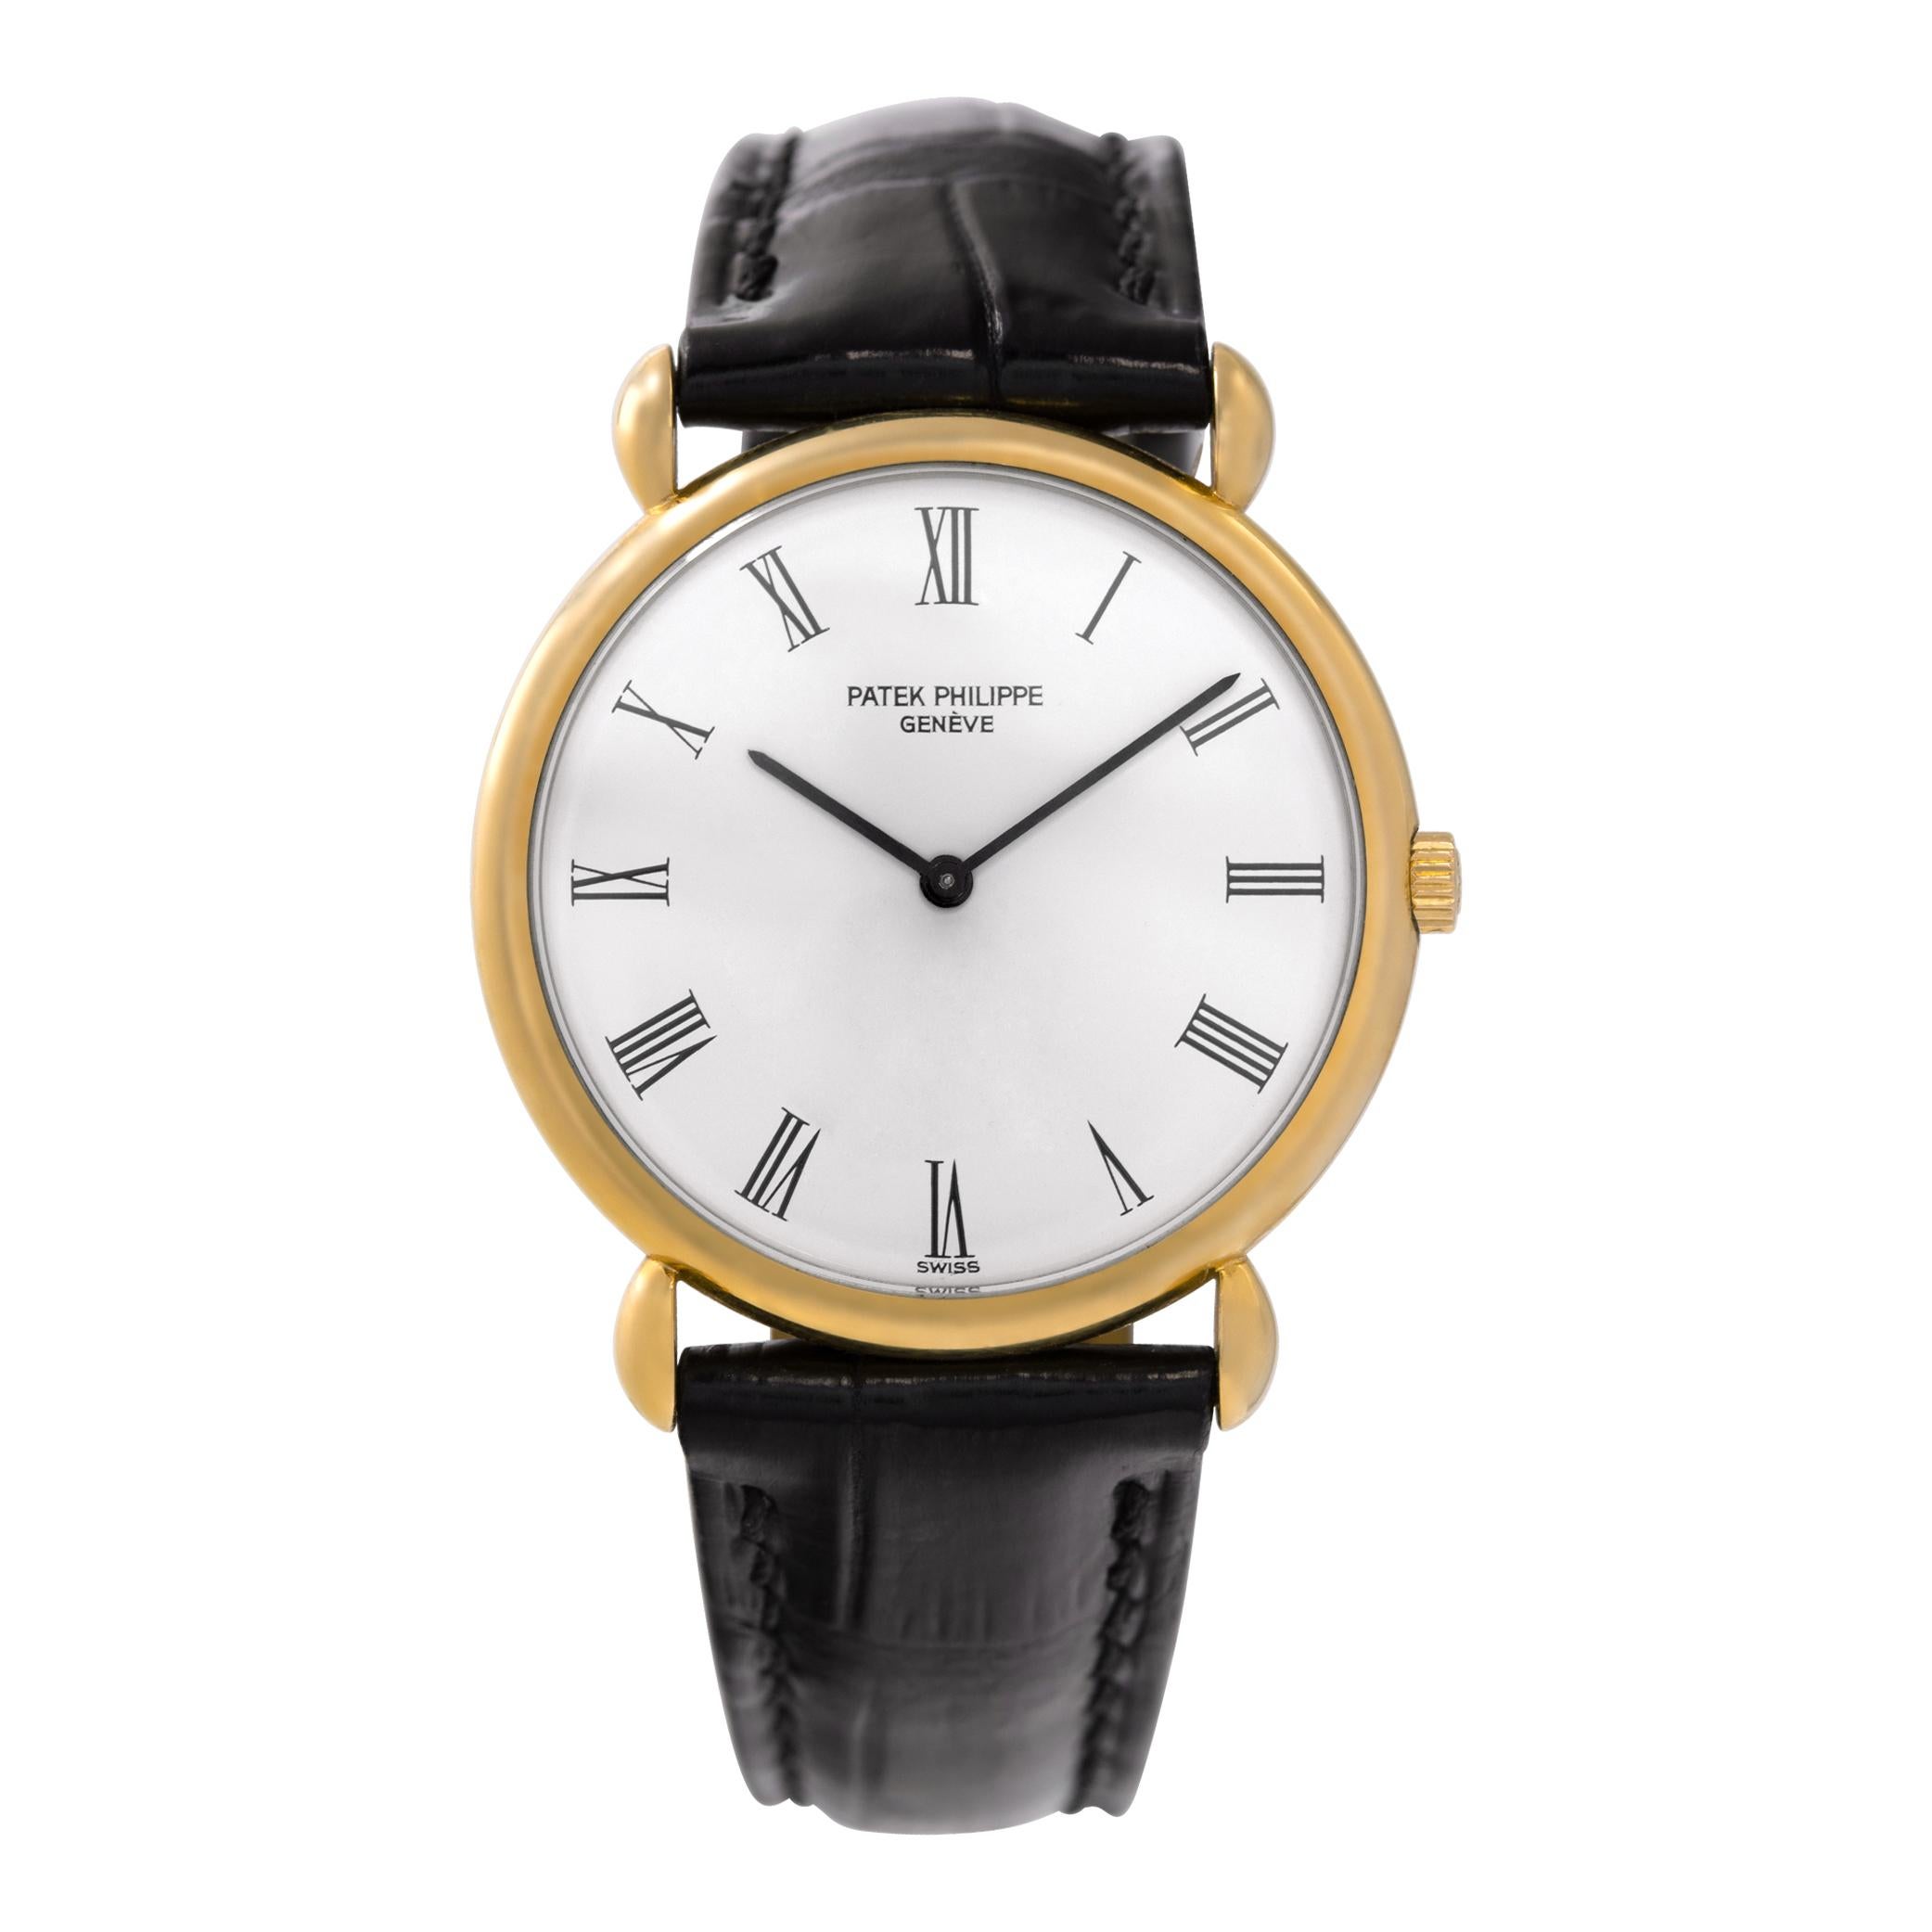 Patek Philippe Calatrava 3820 in yellow gold with a White dial 32mm Manual watch